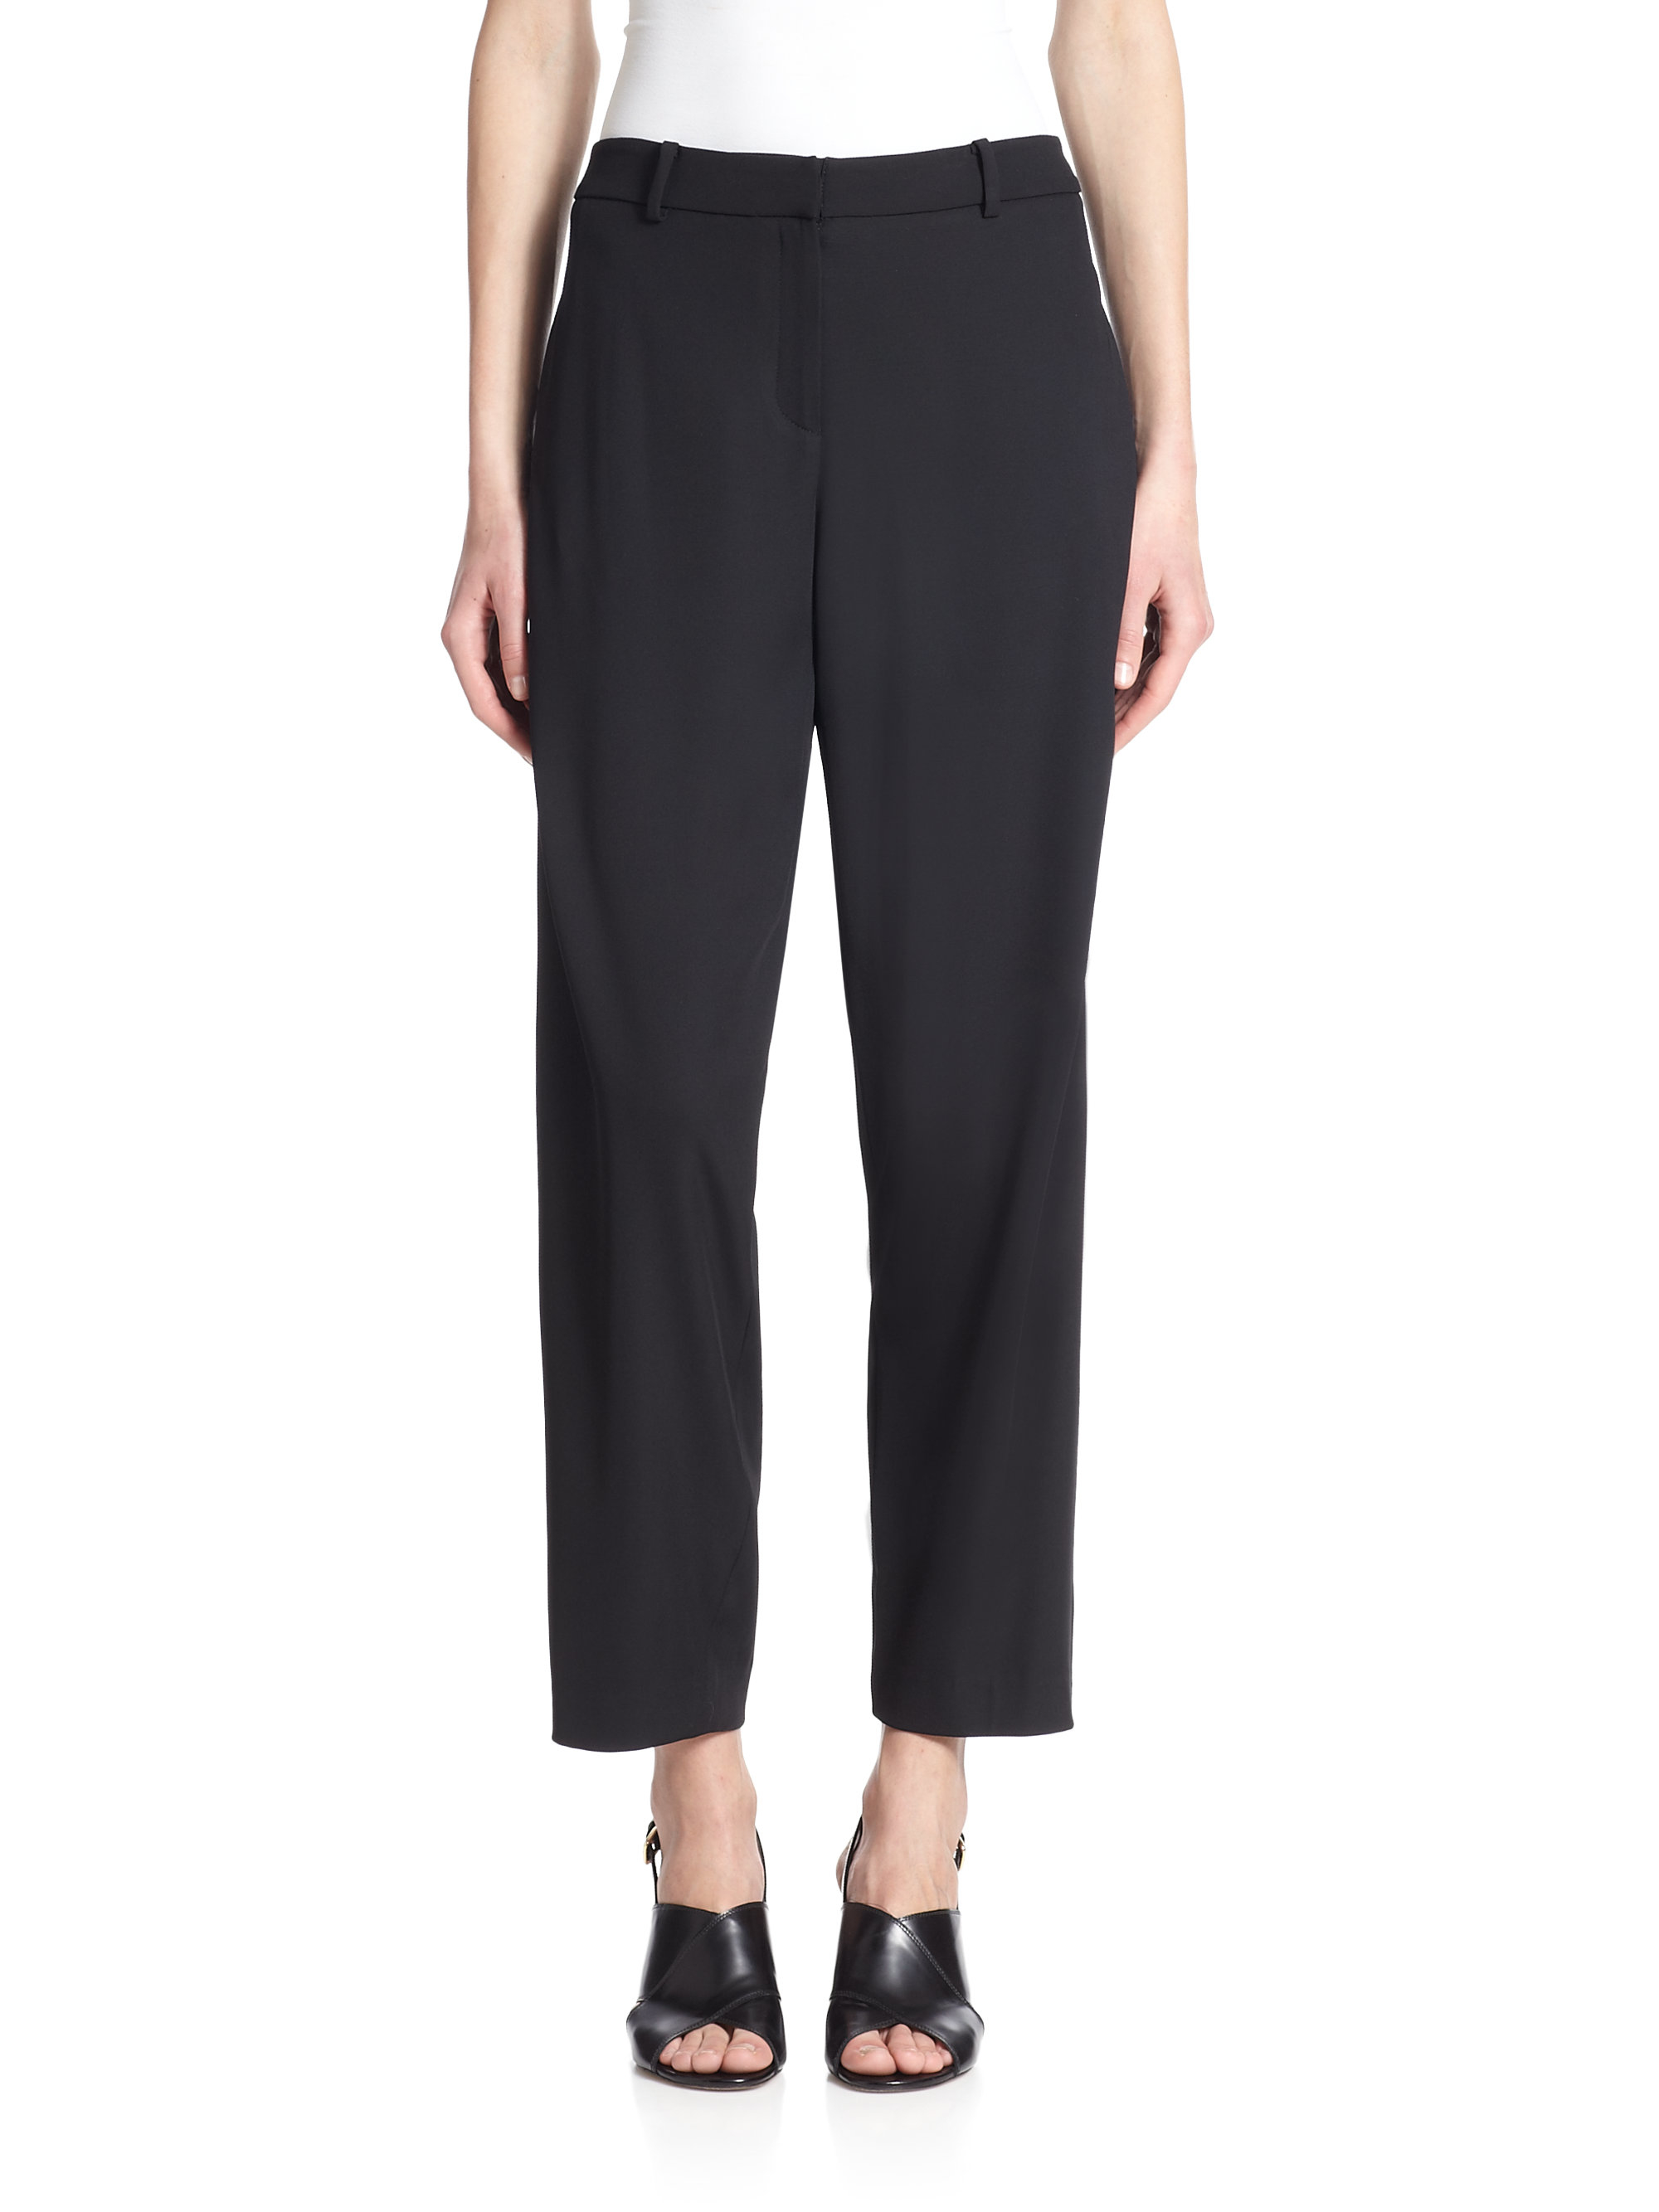 Lyst - Opening ceremony Moodle Crepe Pants in Black